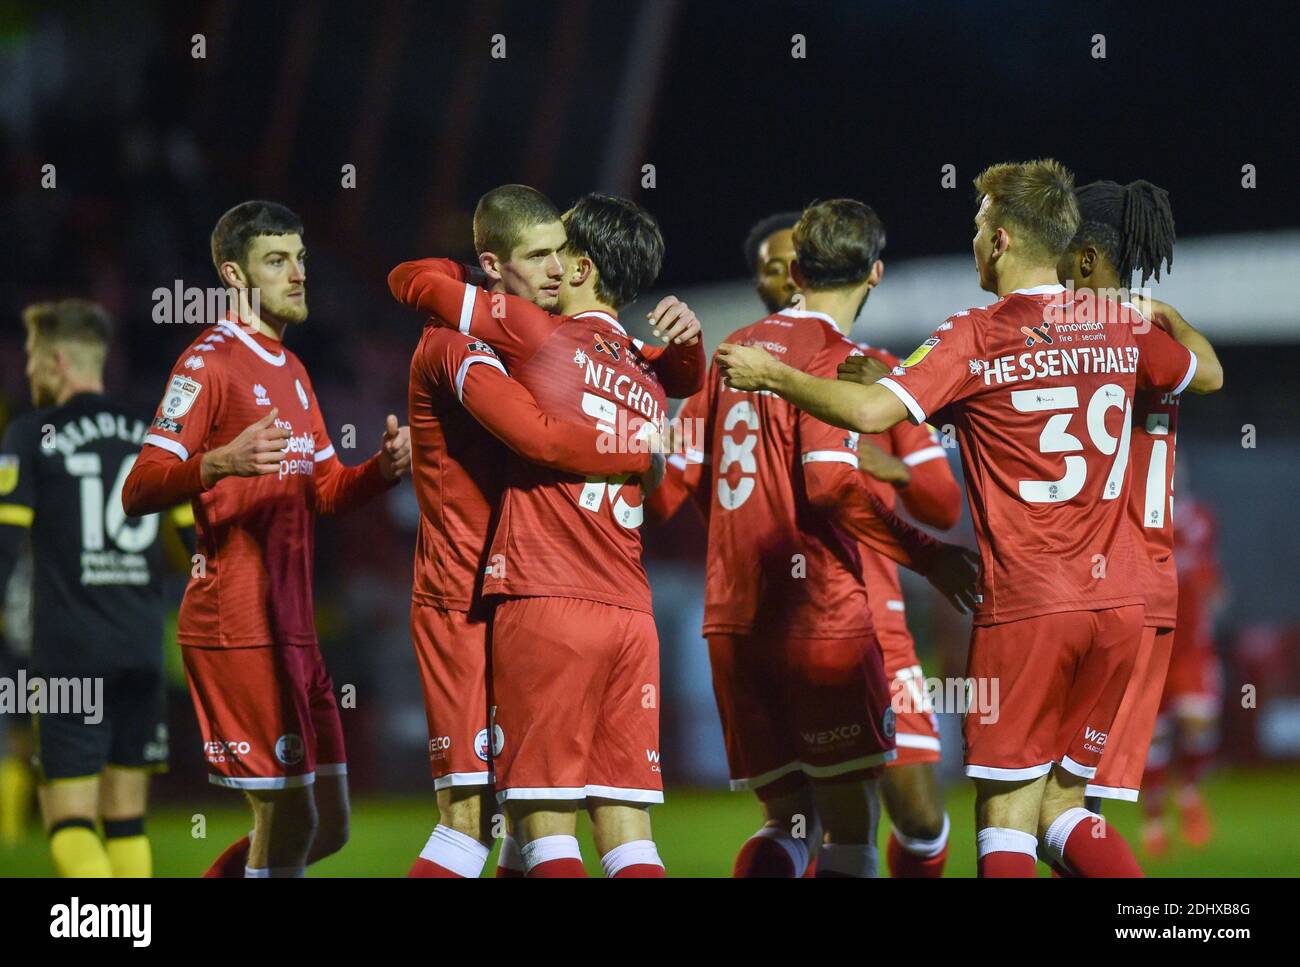 Crawley UK 12th December 2020 -  Tom Nichols of Crawley is mobbed  after scoring their third goal during the Sky Bet EFL League Two match between Crawley Town and Barrow AFC  at the People's Pension Stadium - Editorial use only. No merchandising.  - for details contact Football Dataco  : Credit Simon Dack TPI / Alamy Live News Stock Photo